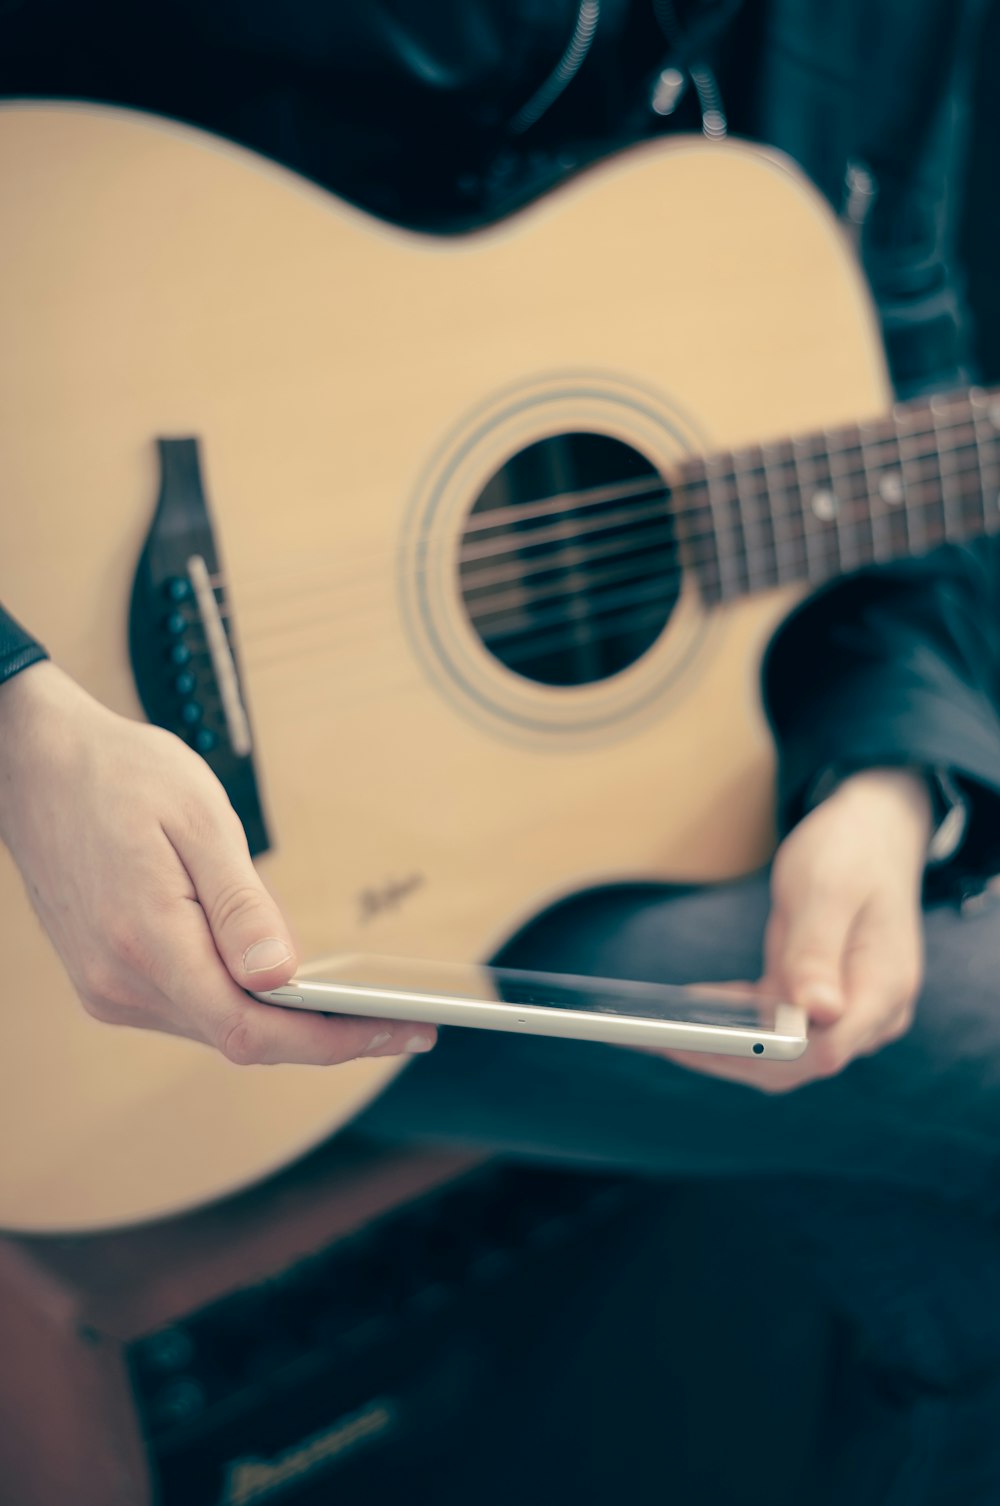 person with guitar on lap holding tablet